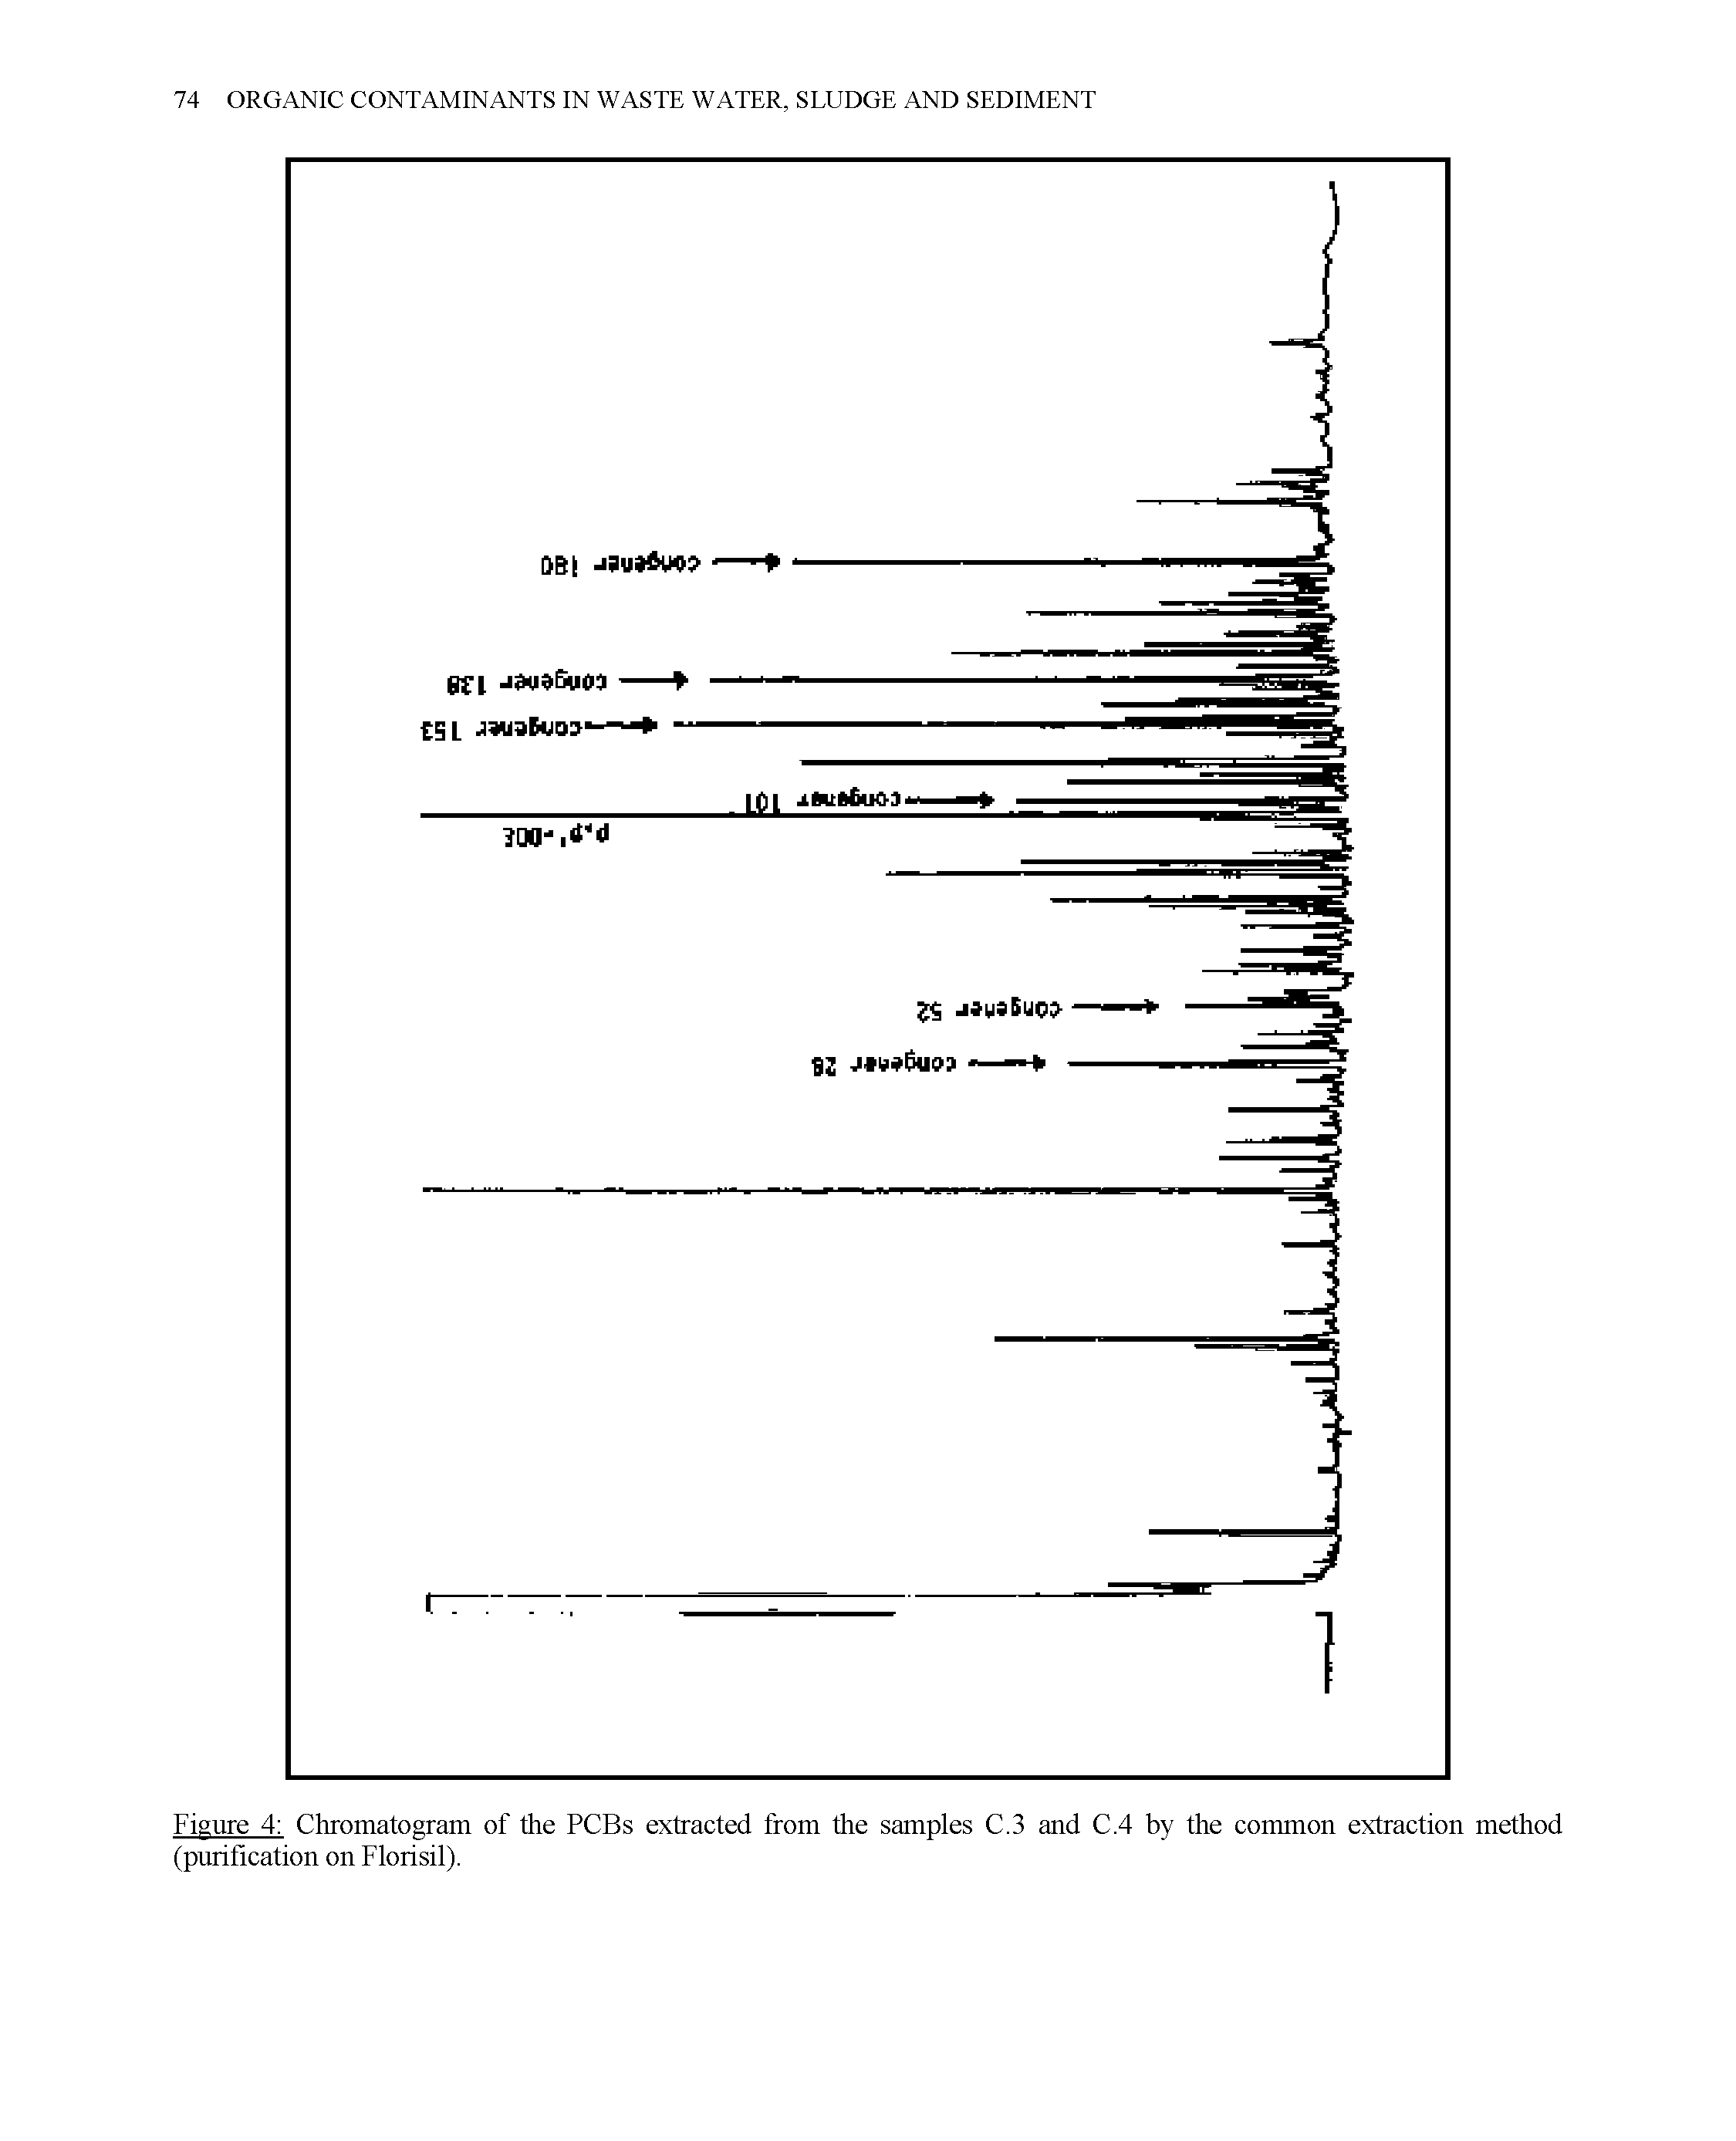 Figure 4 Chromatogram of the PCBs extracted from the samples C.3 and C.4 by the common extraction method (purification on Florisil).